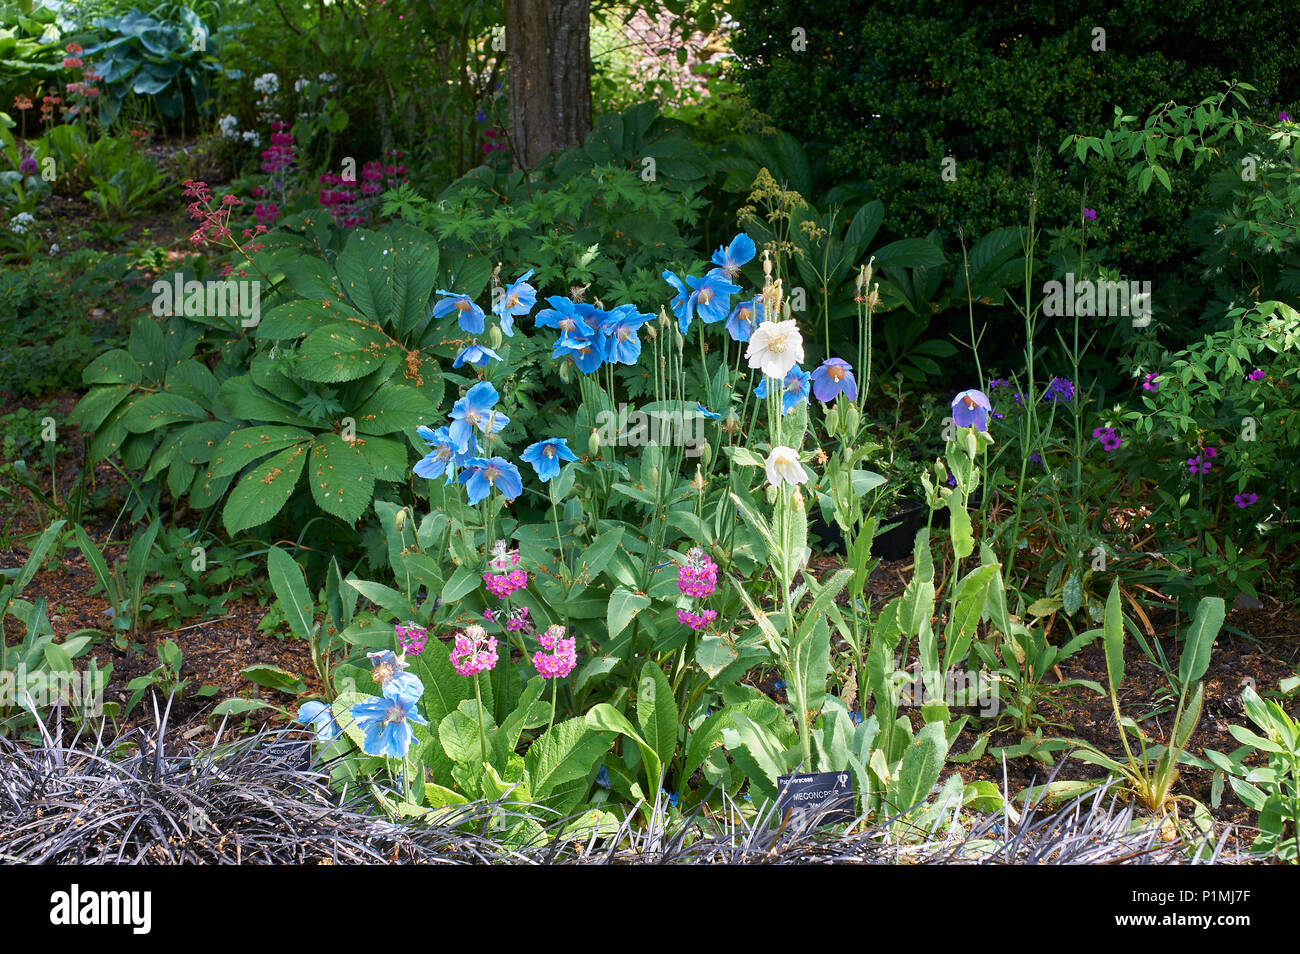 Himalayan Blue Poppy Meconopsis betonicifolia flowering plants in a garden border in the Lake District National Park, UK, GB. Stock Photo